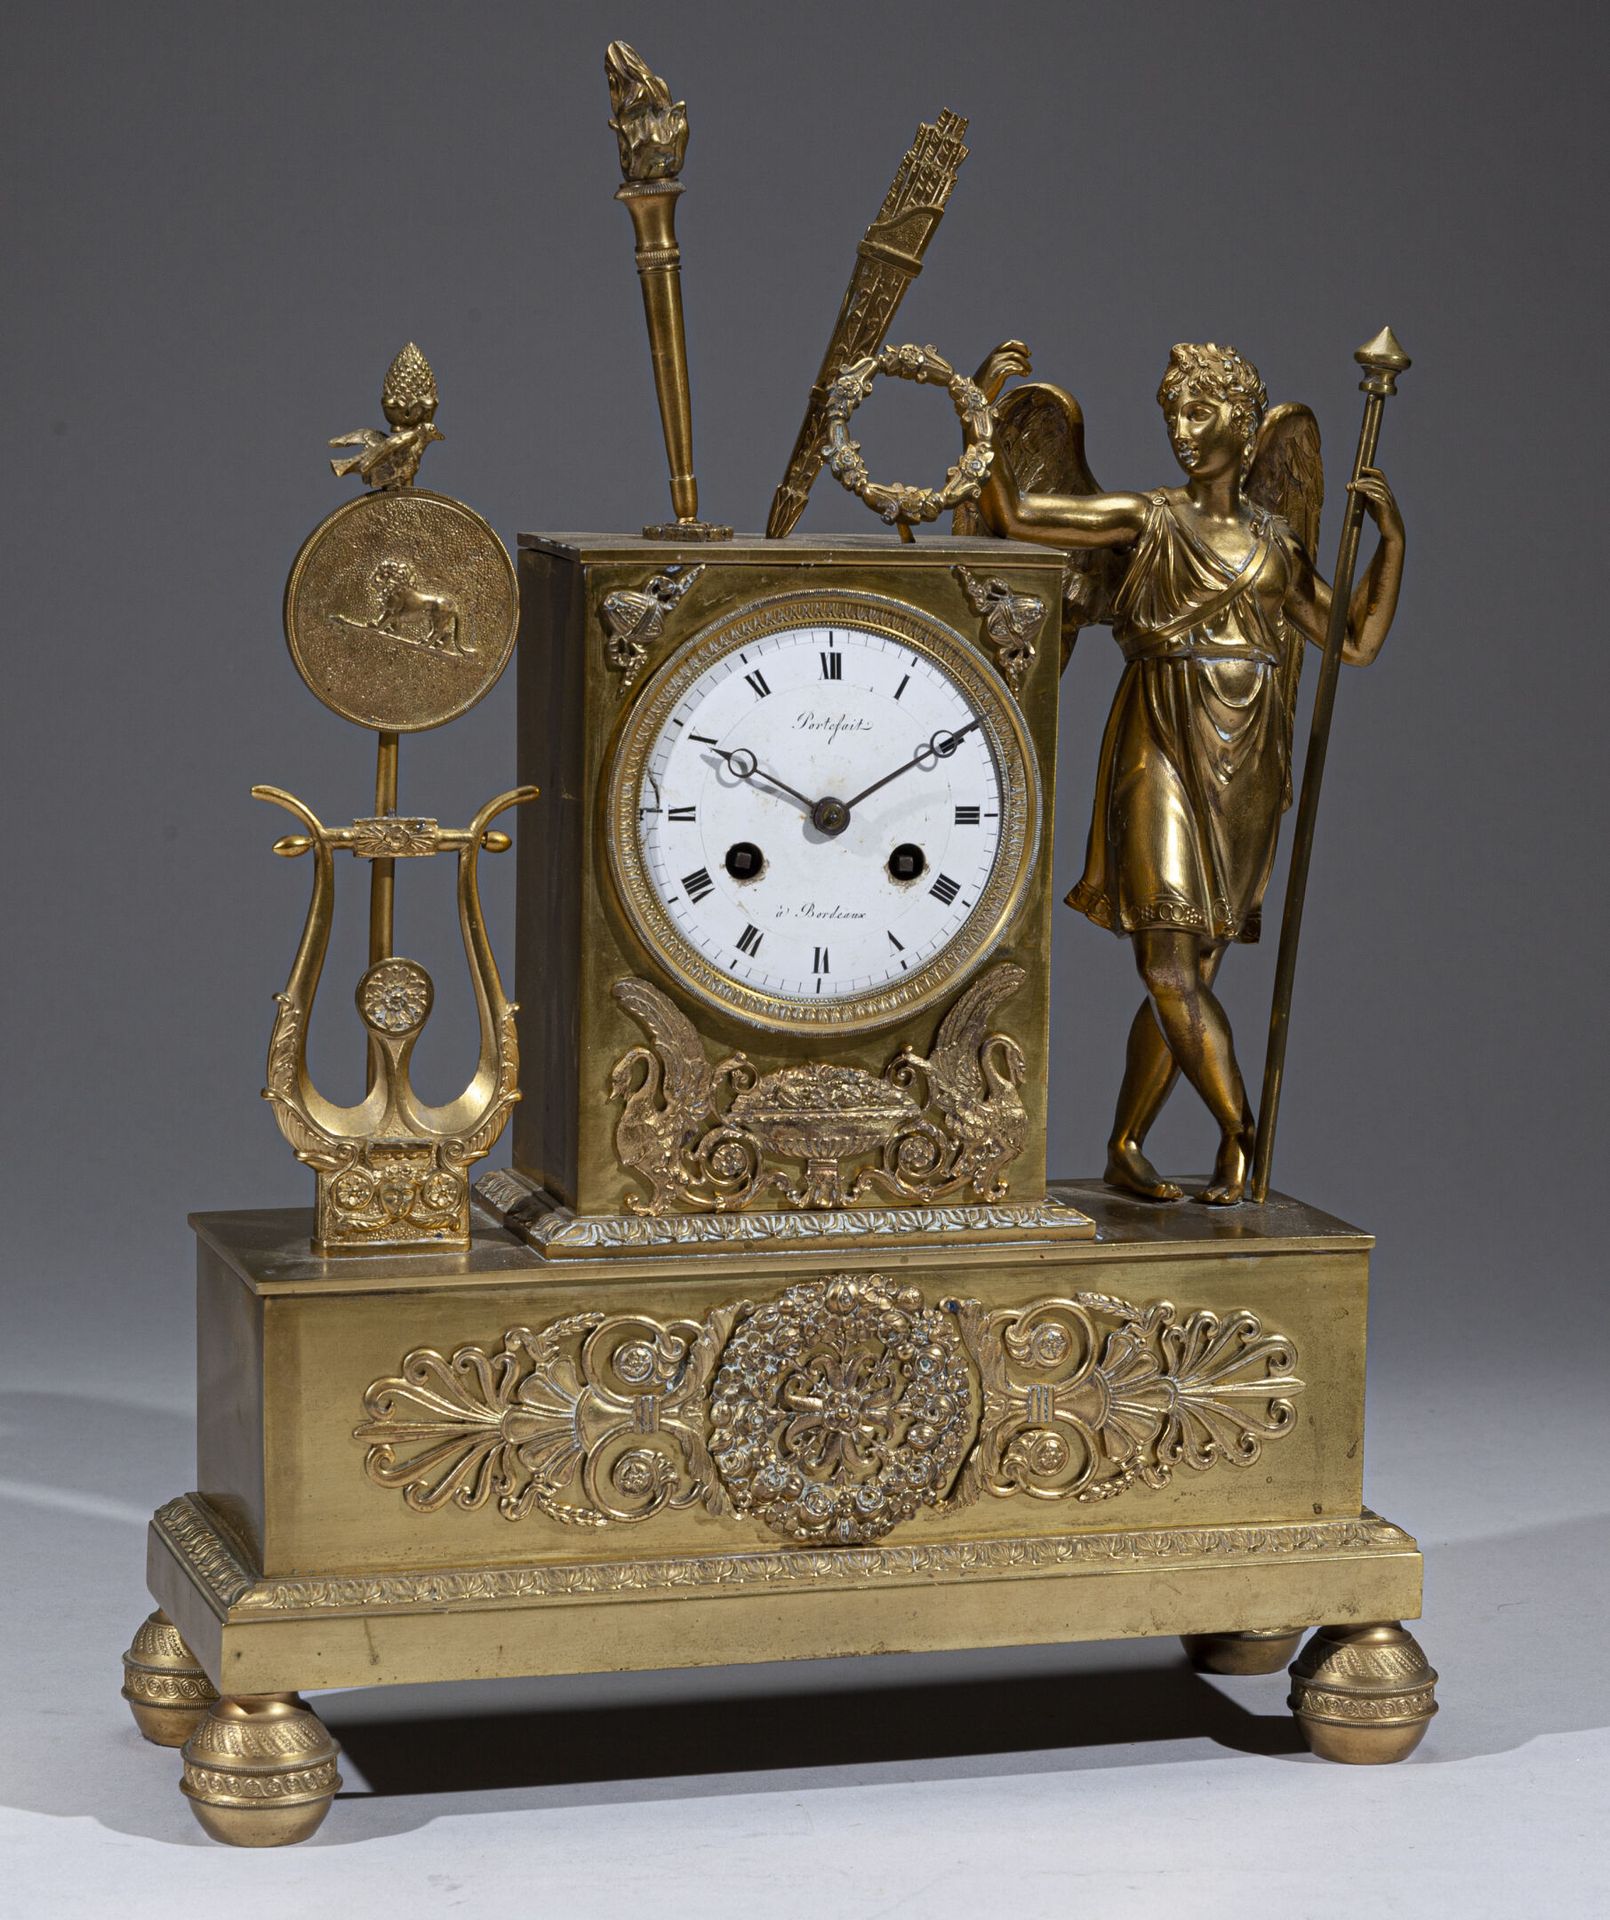 Gilt bronze clock with a genie holding a lamp, leaning on a base topped by a cro&hellip;